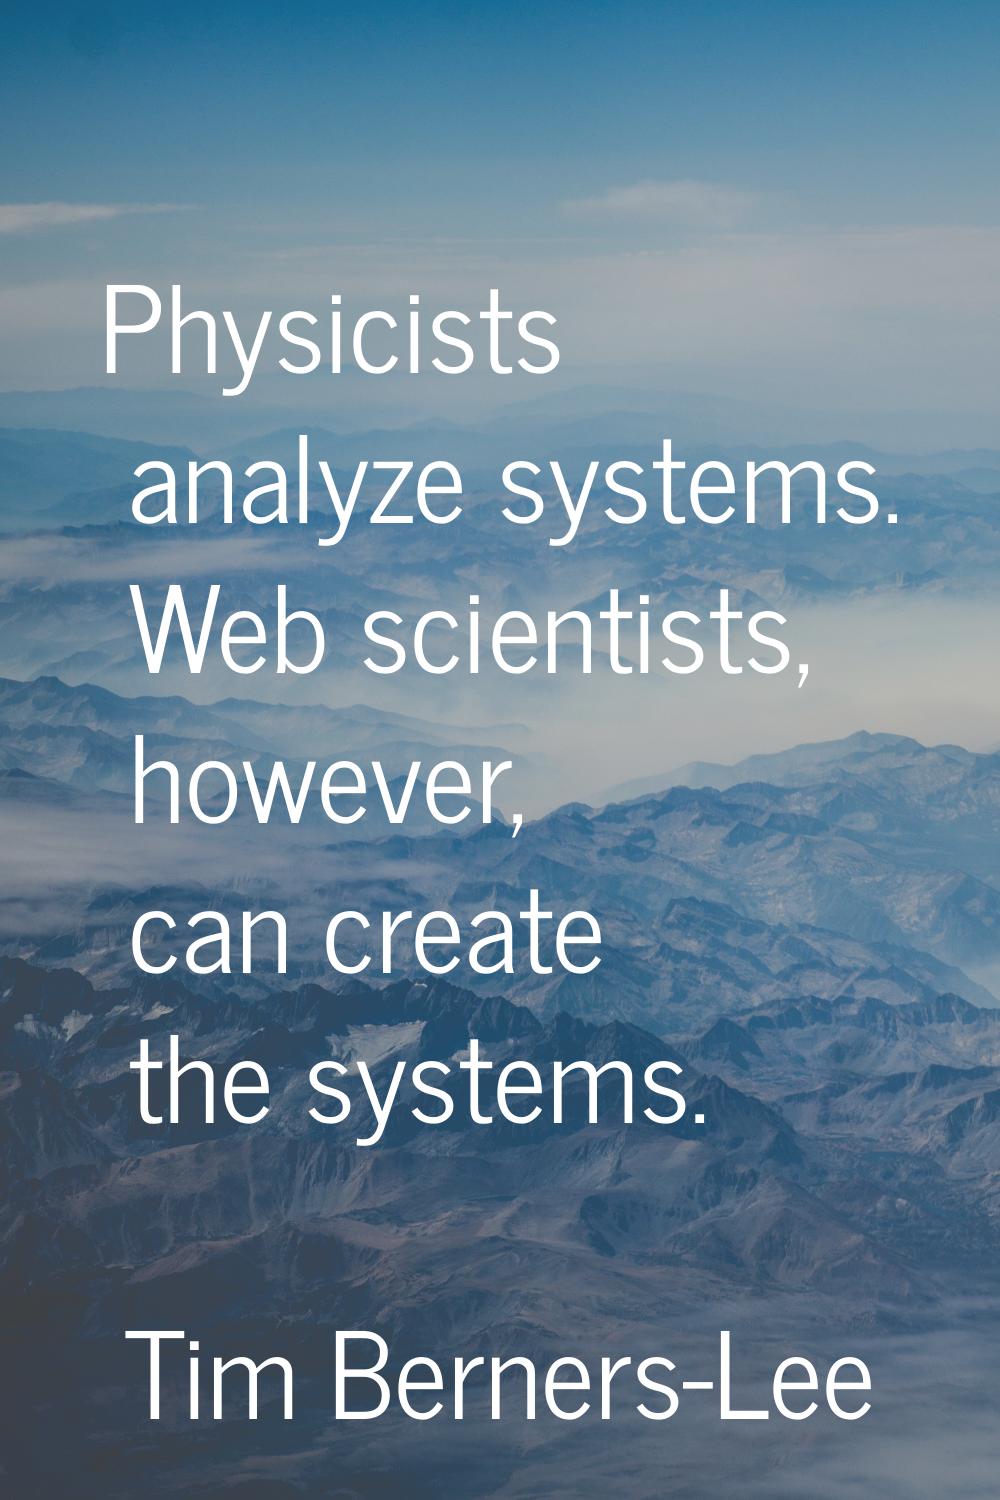 Physicists analyze systems. Web scientists, however, can create the systems.